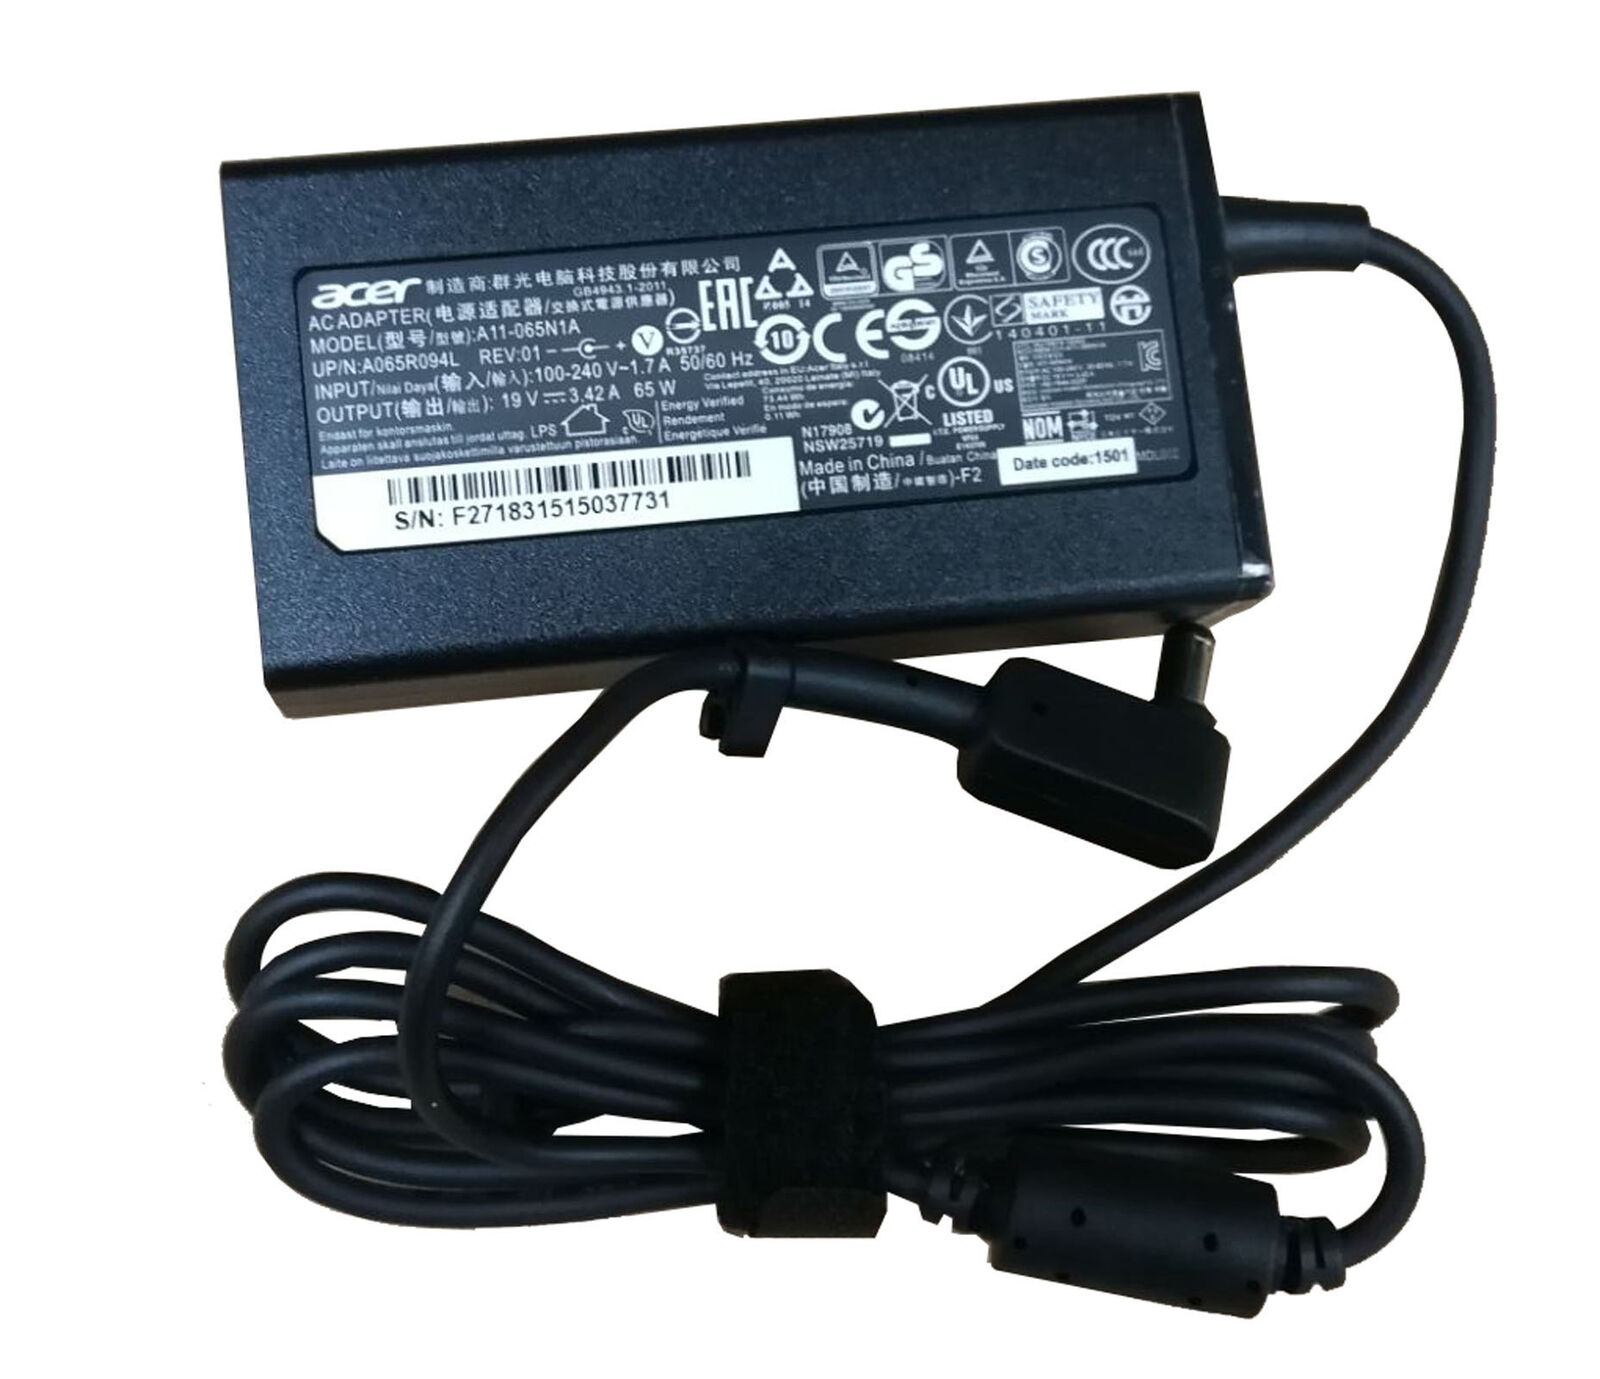 65W Acer Chromebook CB5-571-C6DL Charger AC Adapter Power Cord